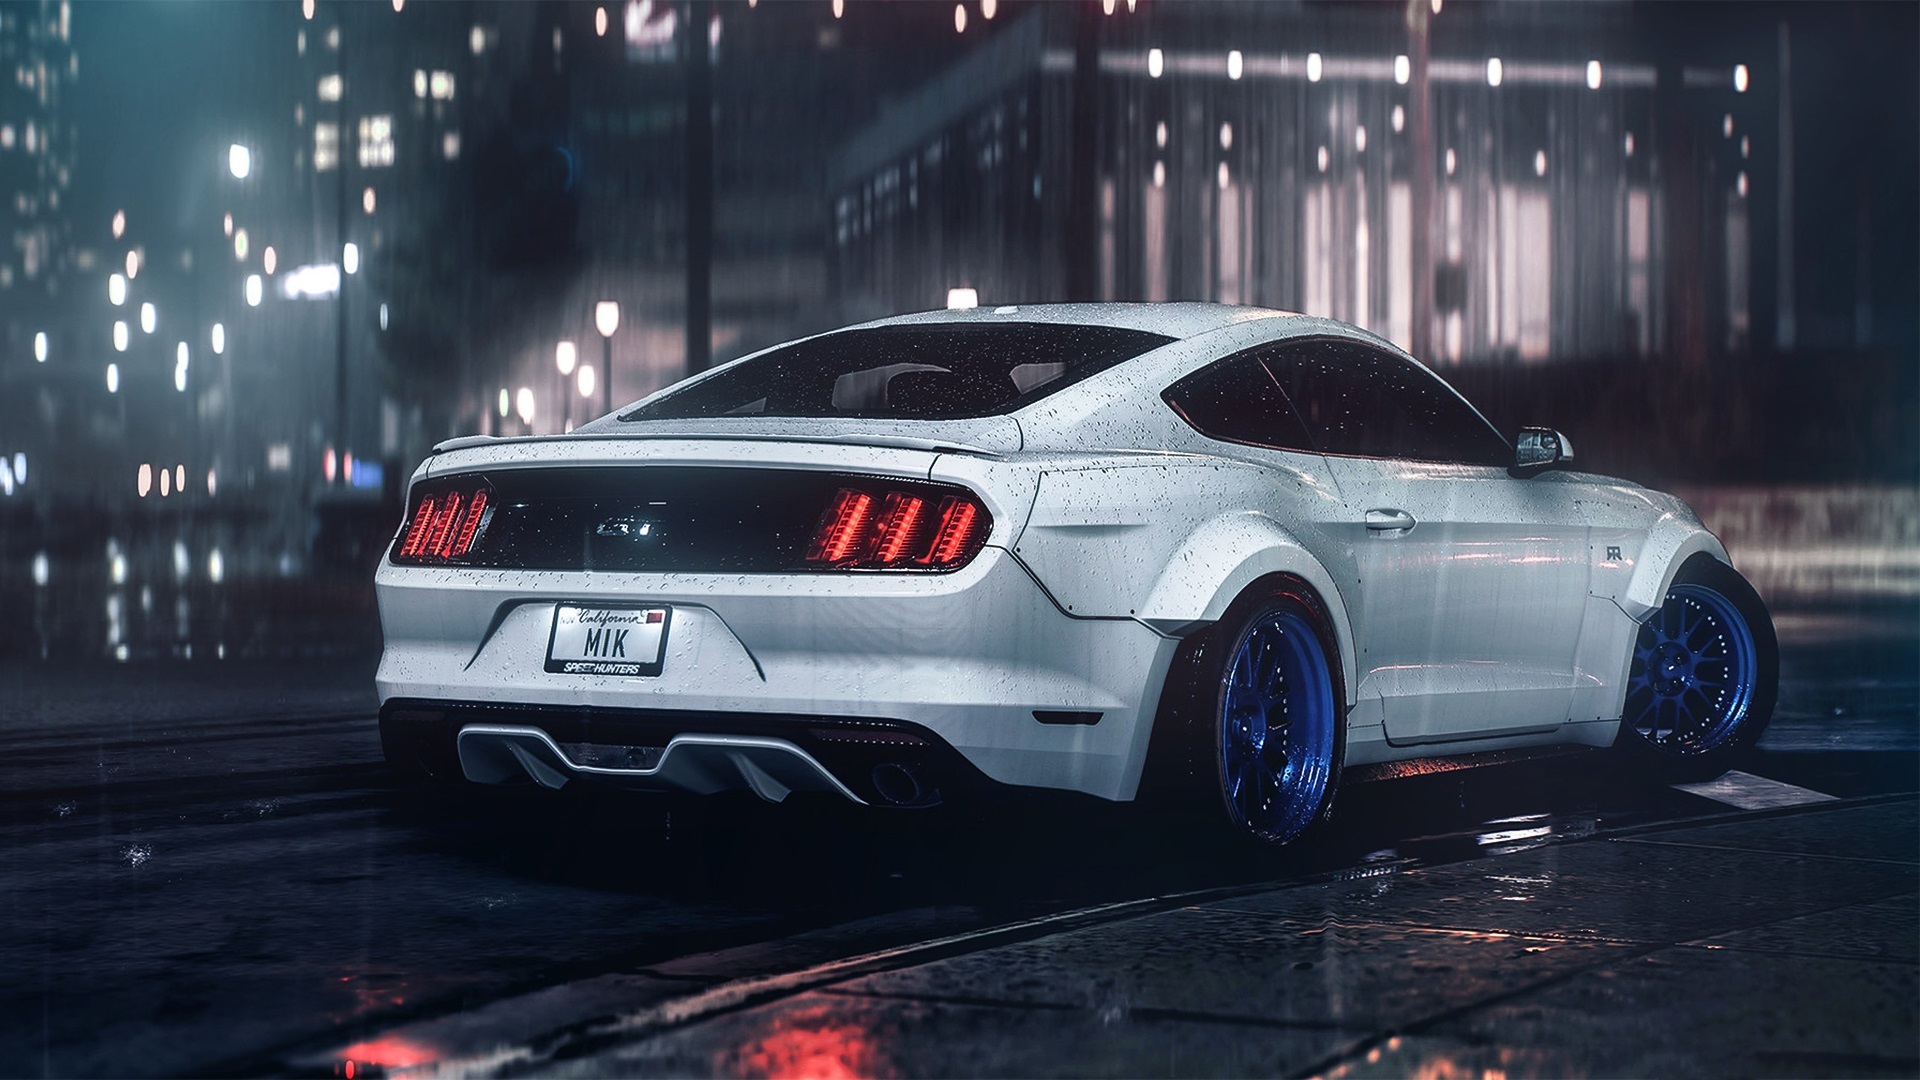 Ford Mustang Gt Wallpaper Pictures Image